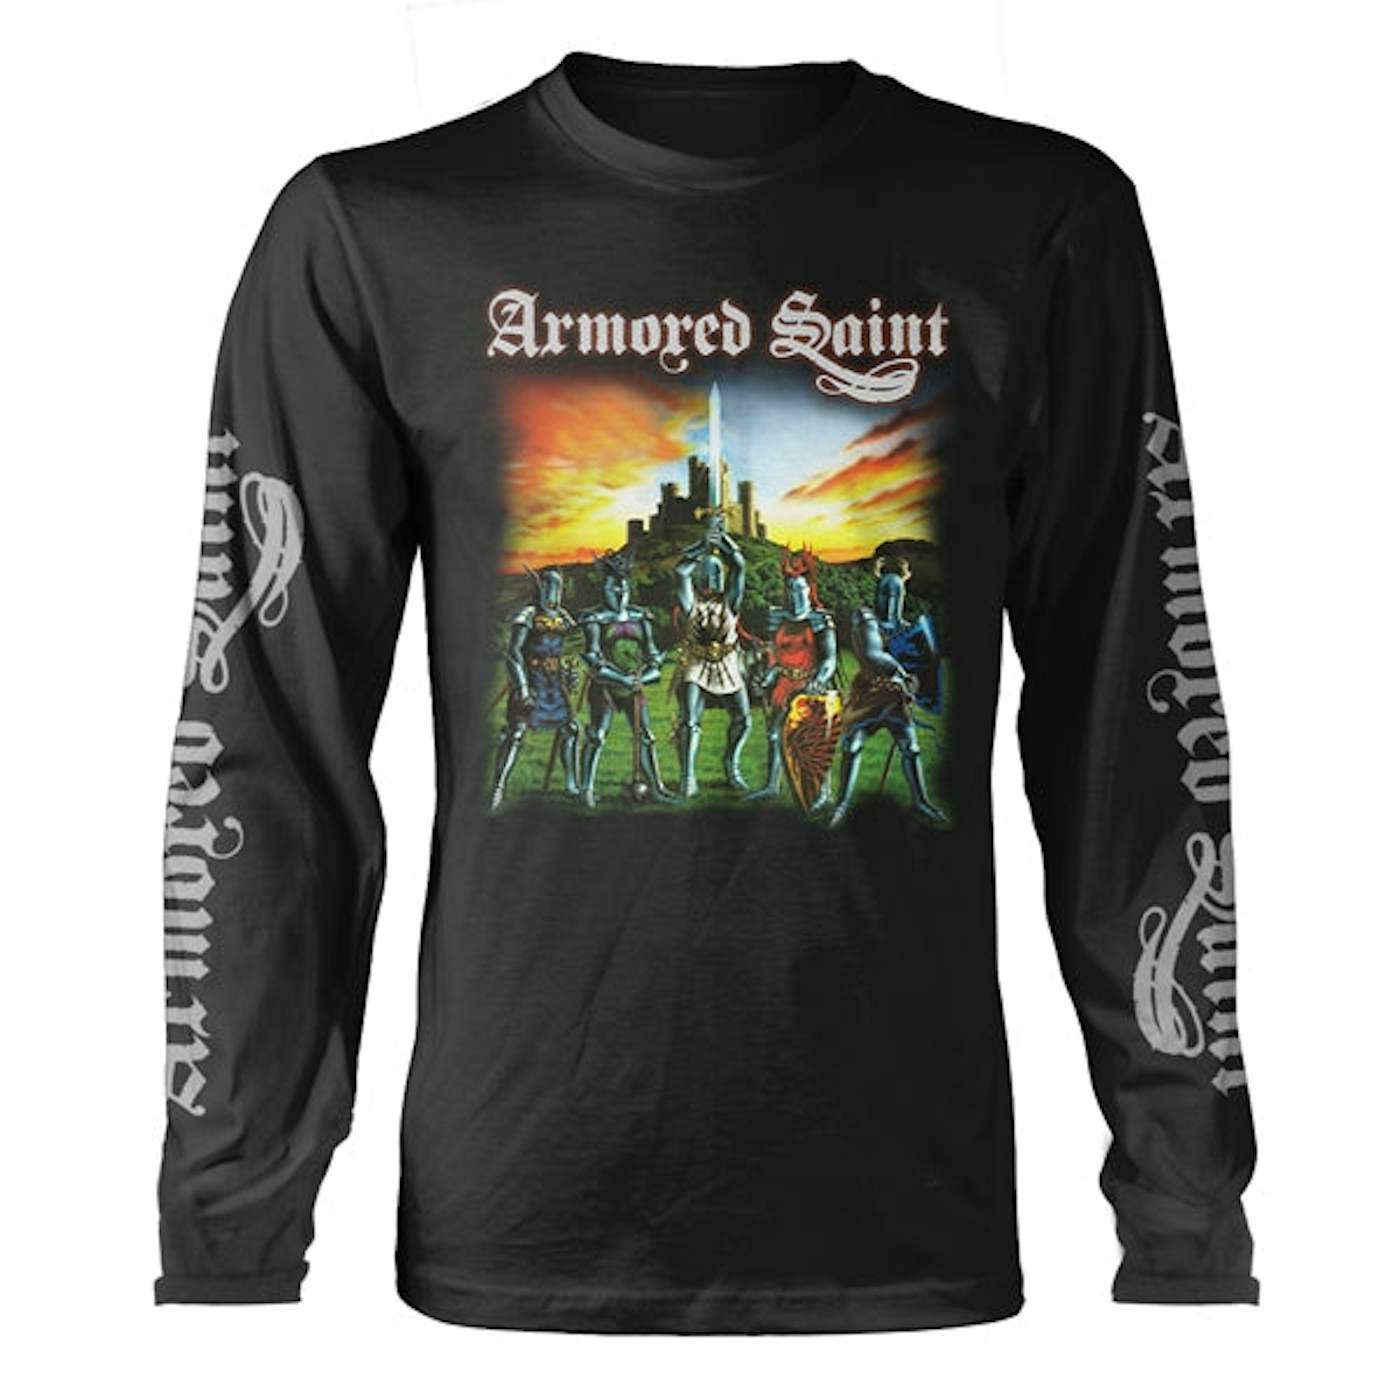 Armored Saint Long Sleeve T Shirt - March Of The Saint